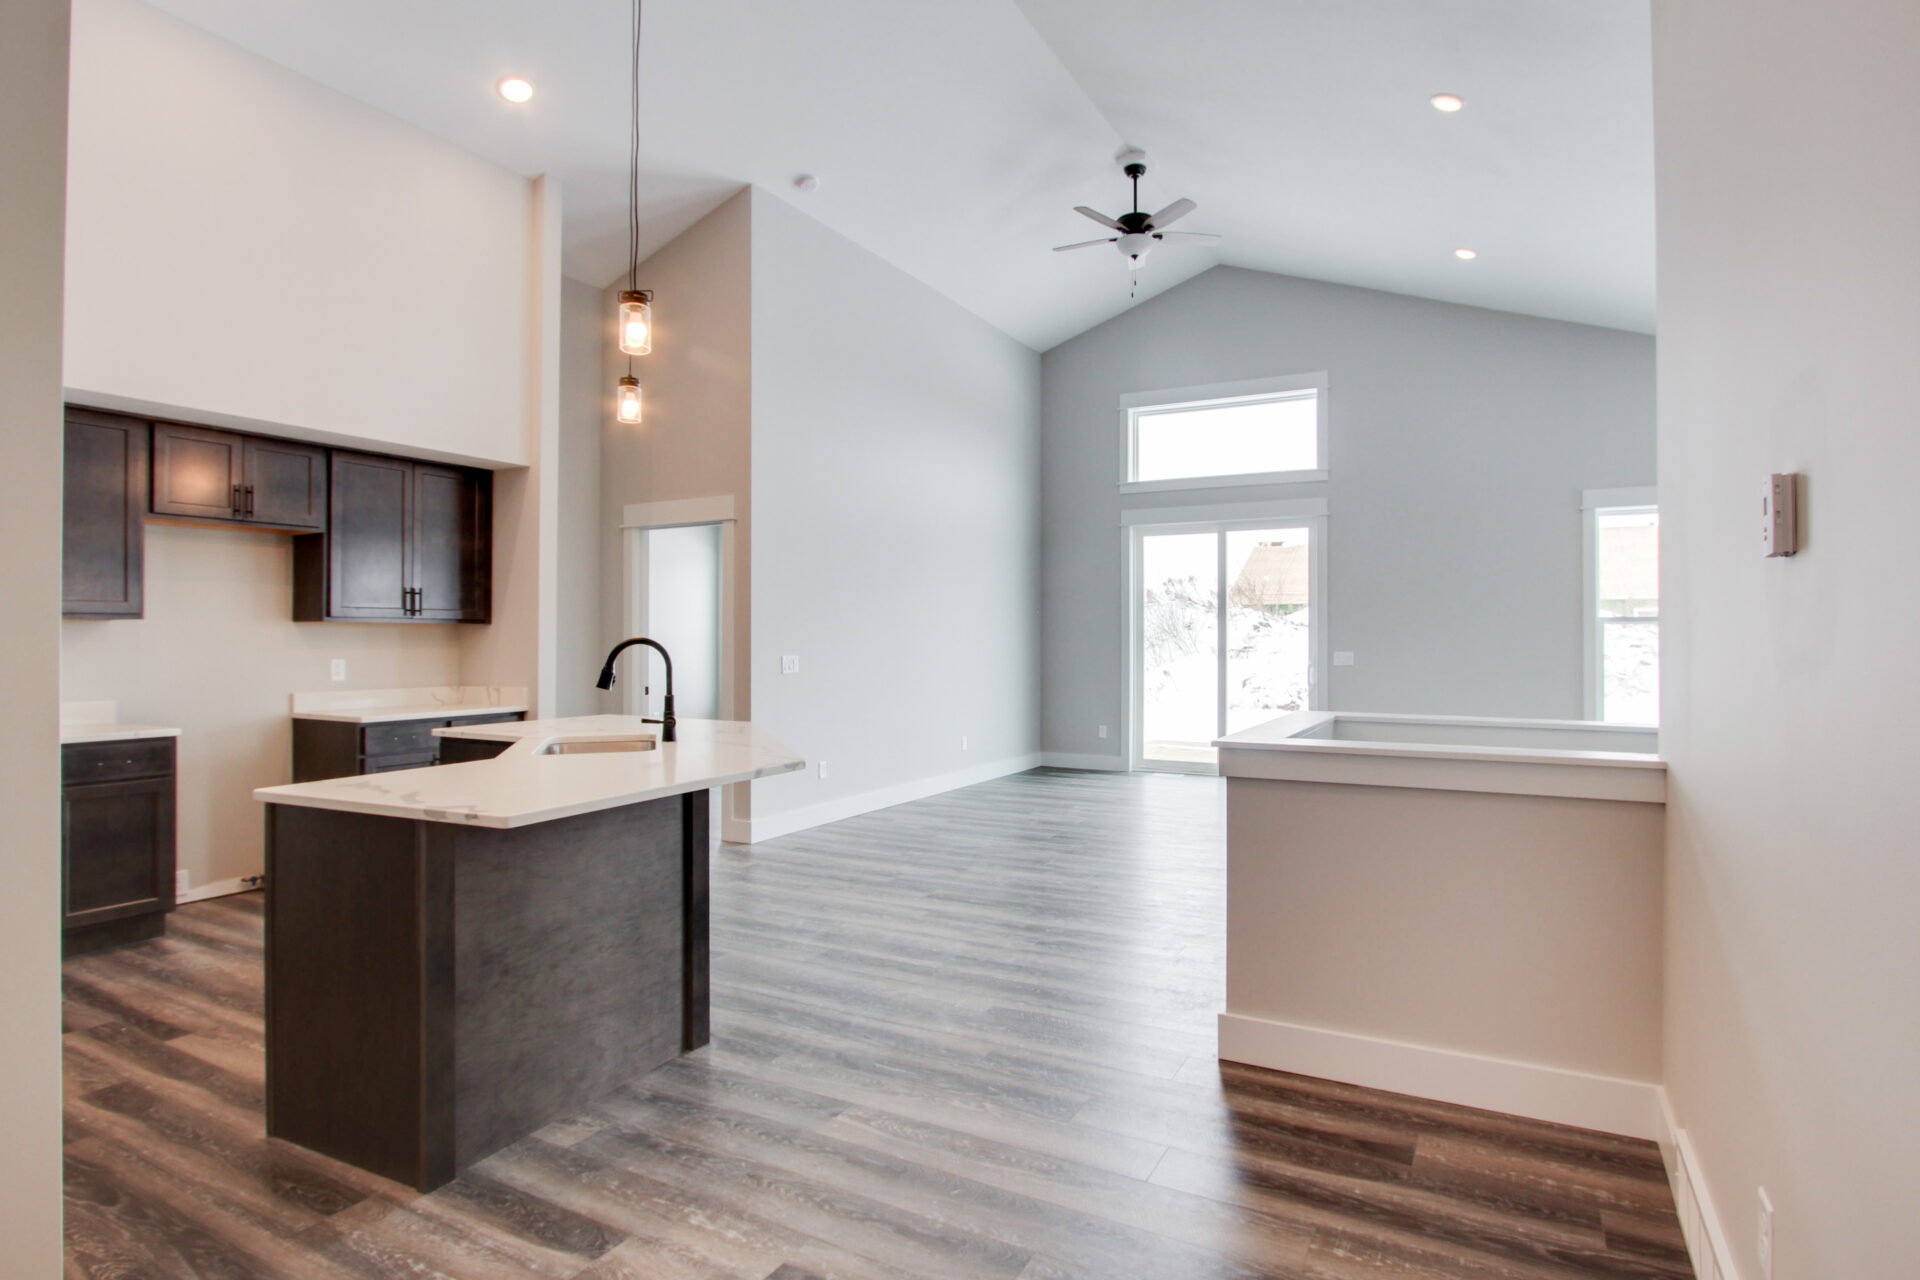 An inside look at a new home in a subdivision, ready for the owner to move in